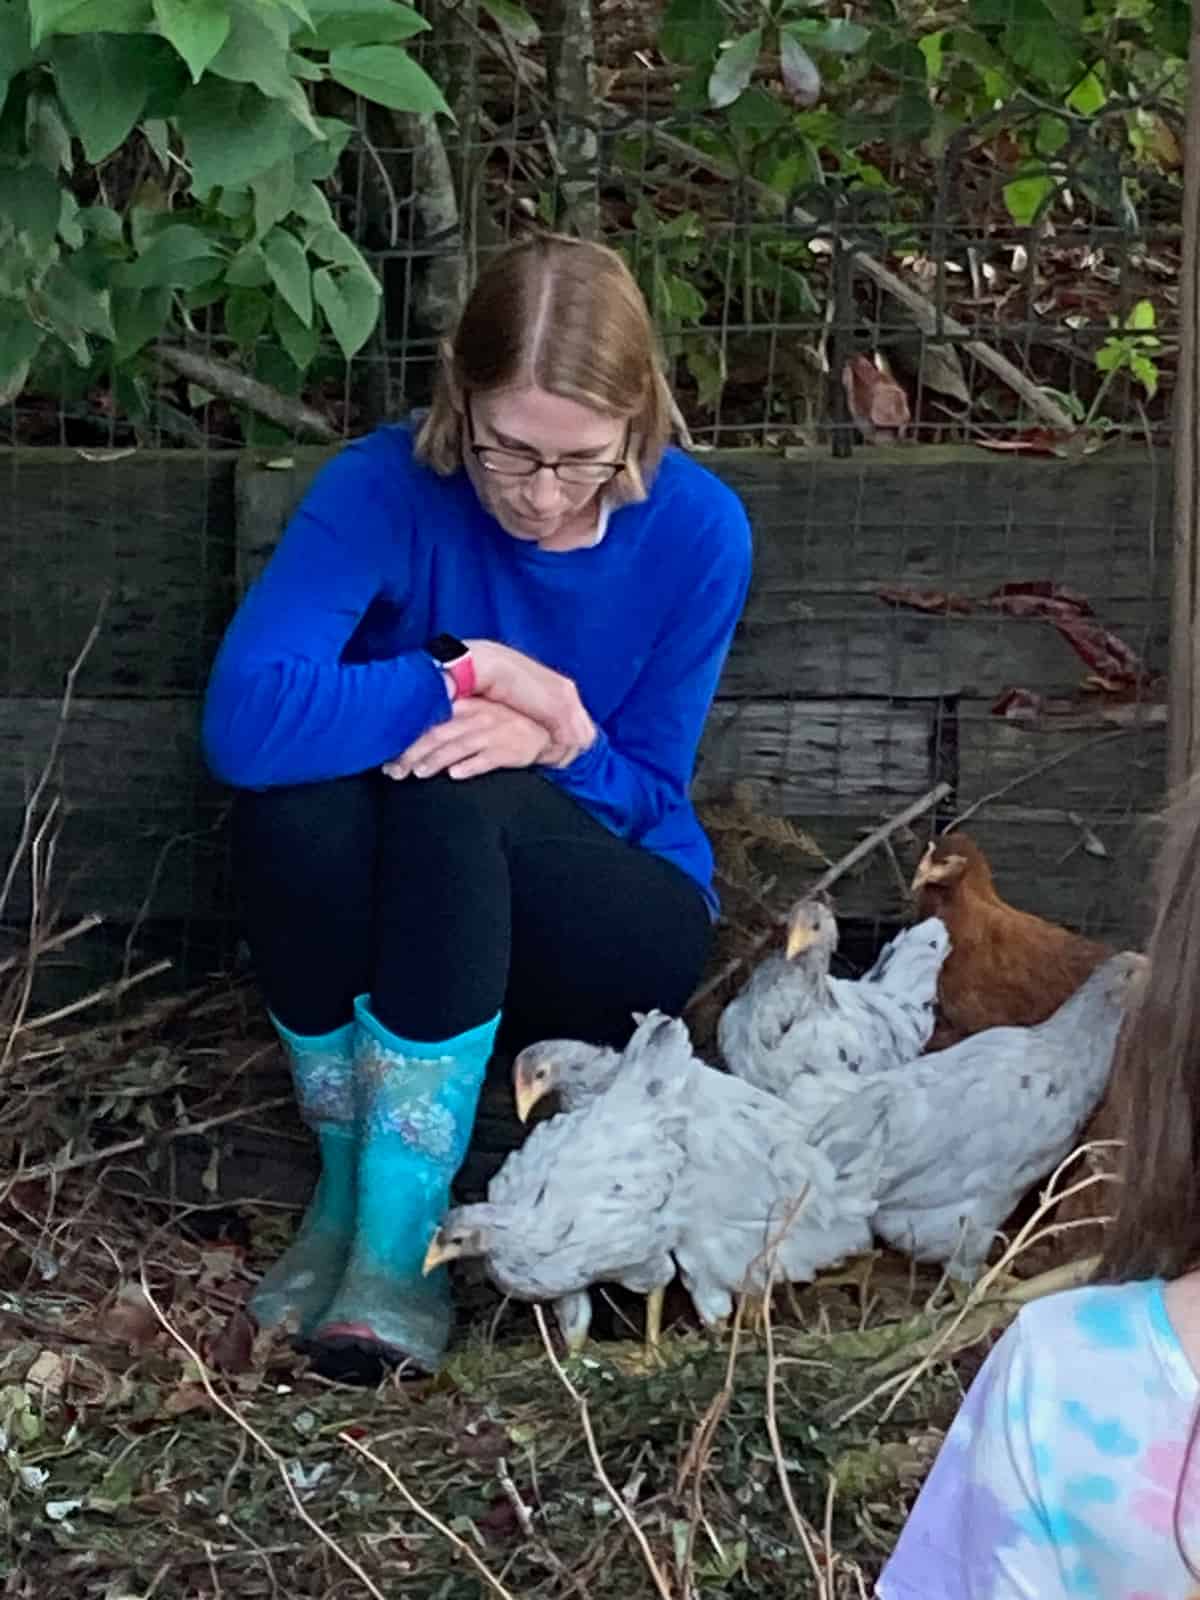 small chickens huddling next to a woman in a blue shirt and glasses.